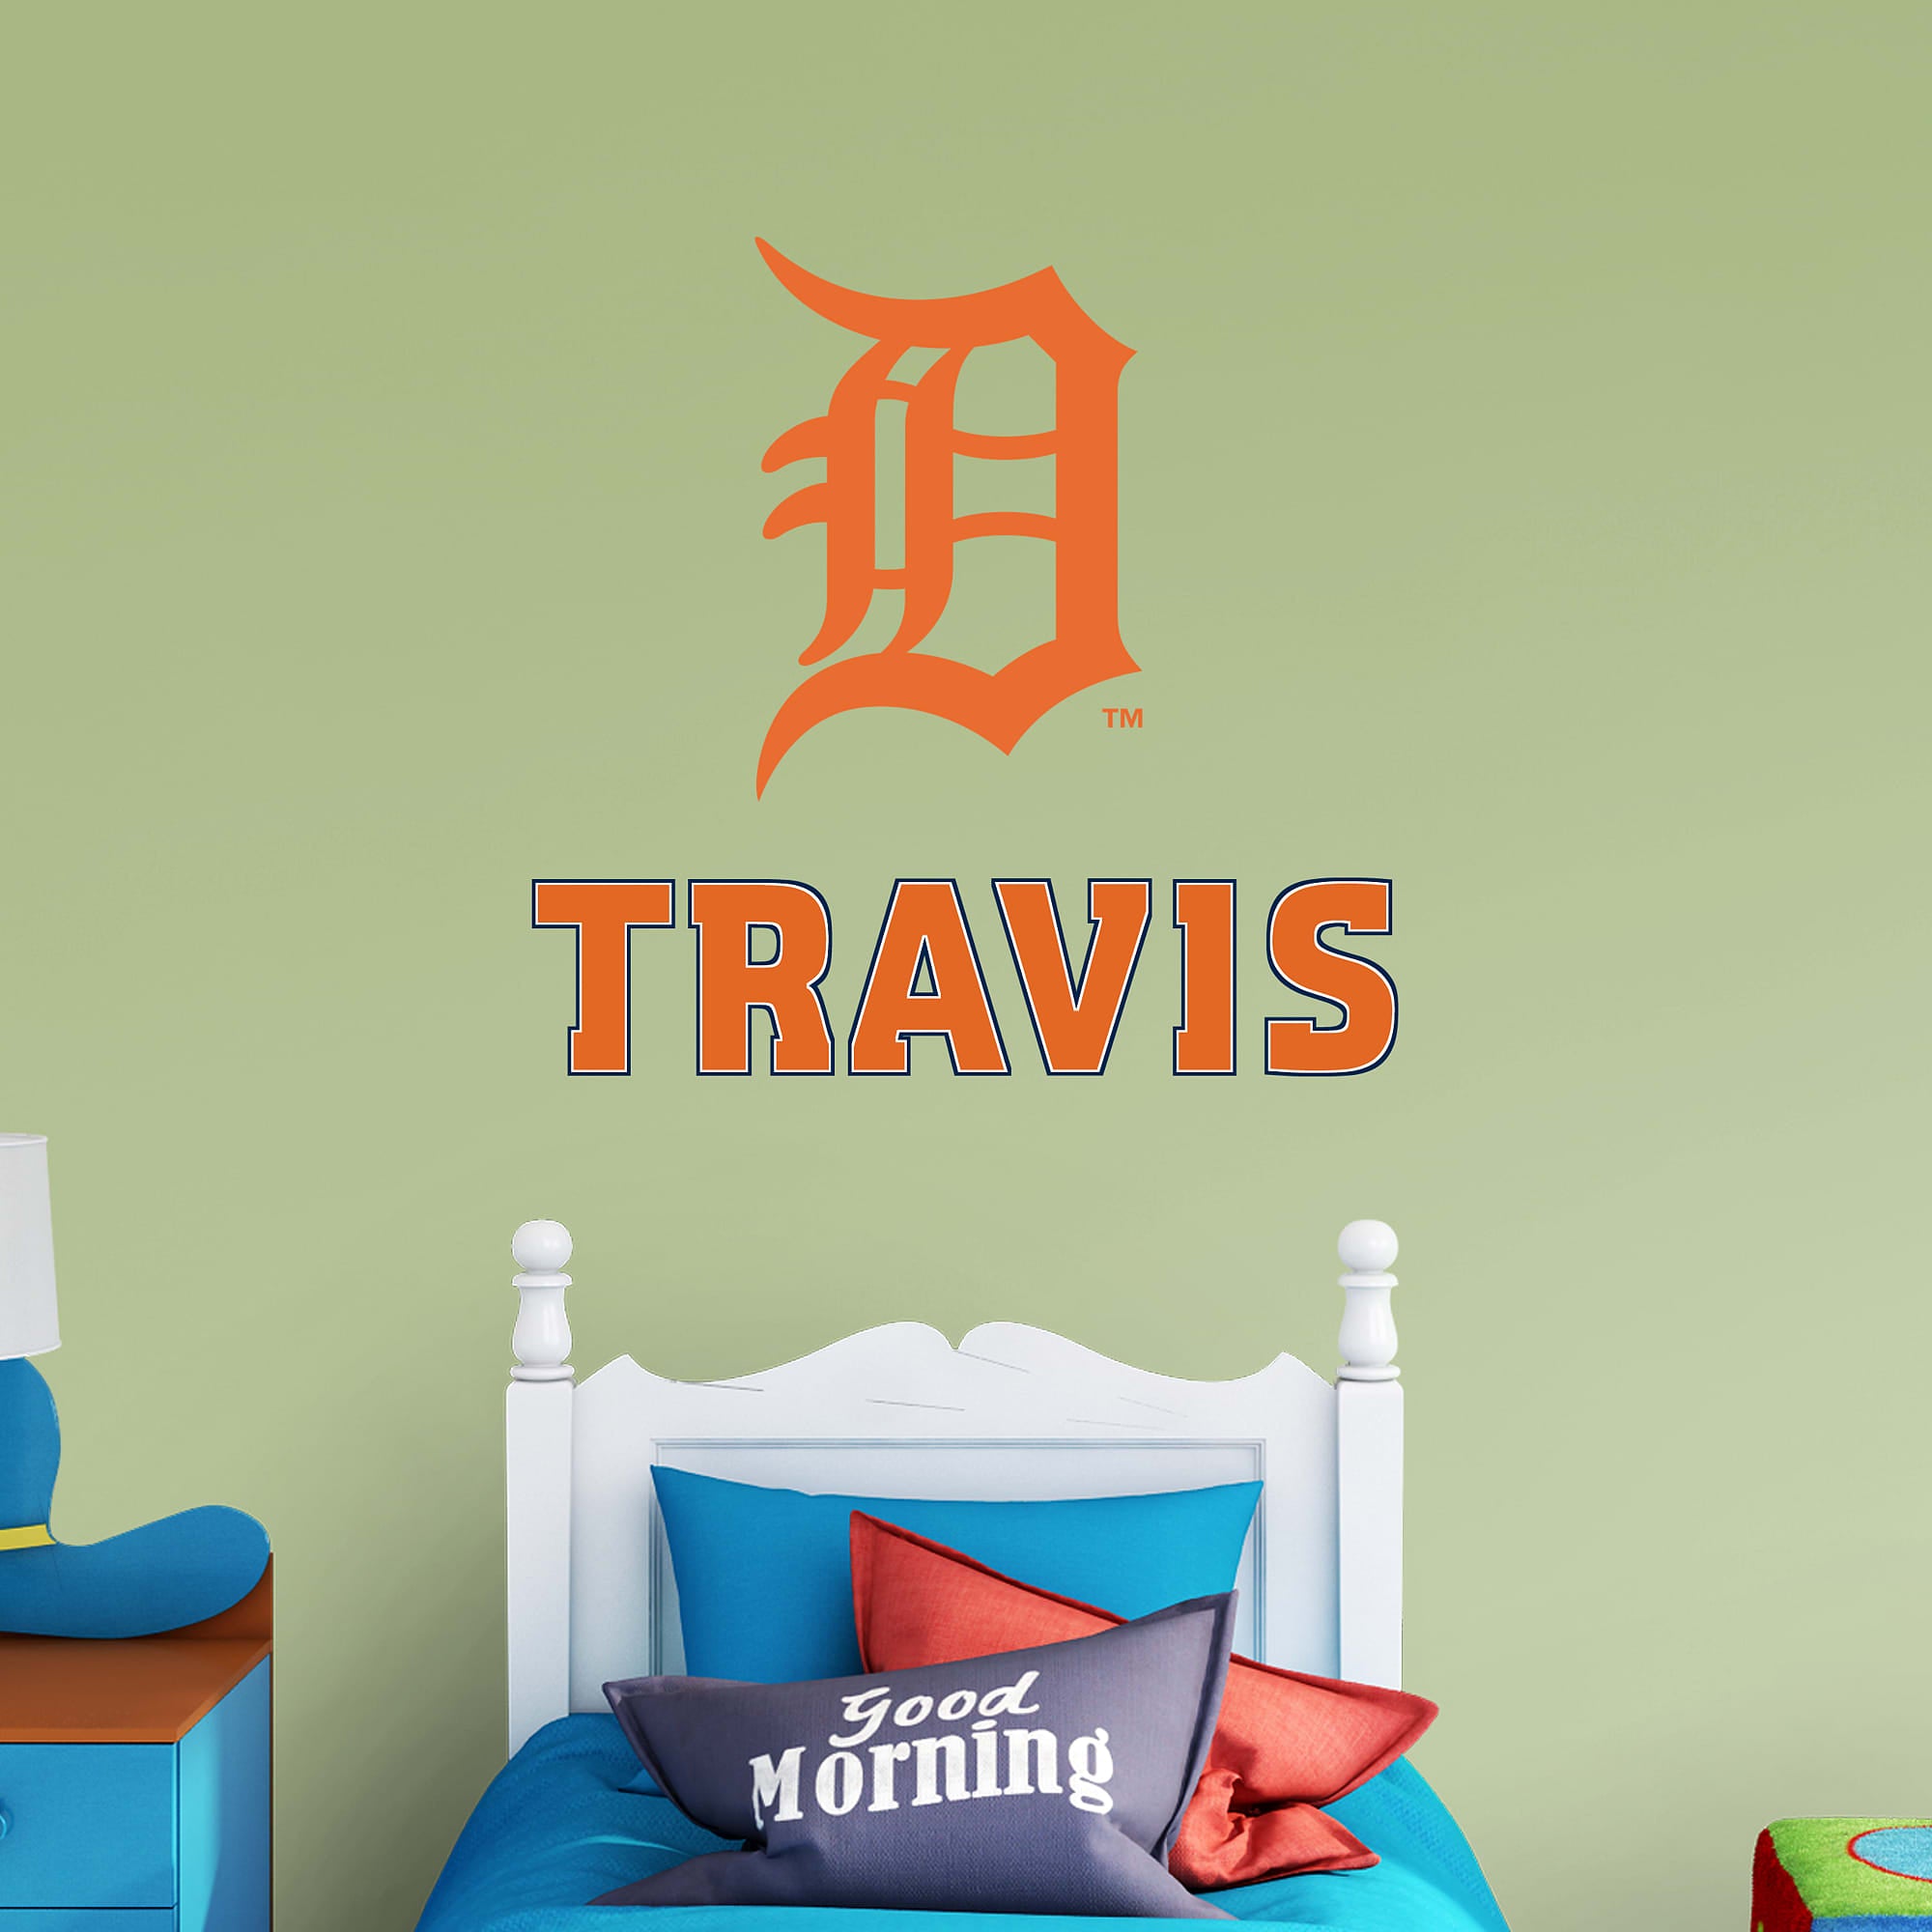 Detroit Tigers: Old English "D" Stacked Personalized Name - Officially Licensed MLB Transfer Decal in Orange (52"W x 39.5"H) by